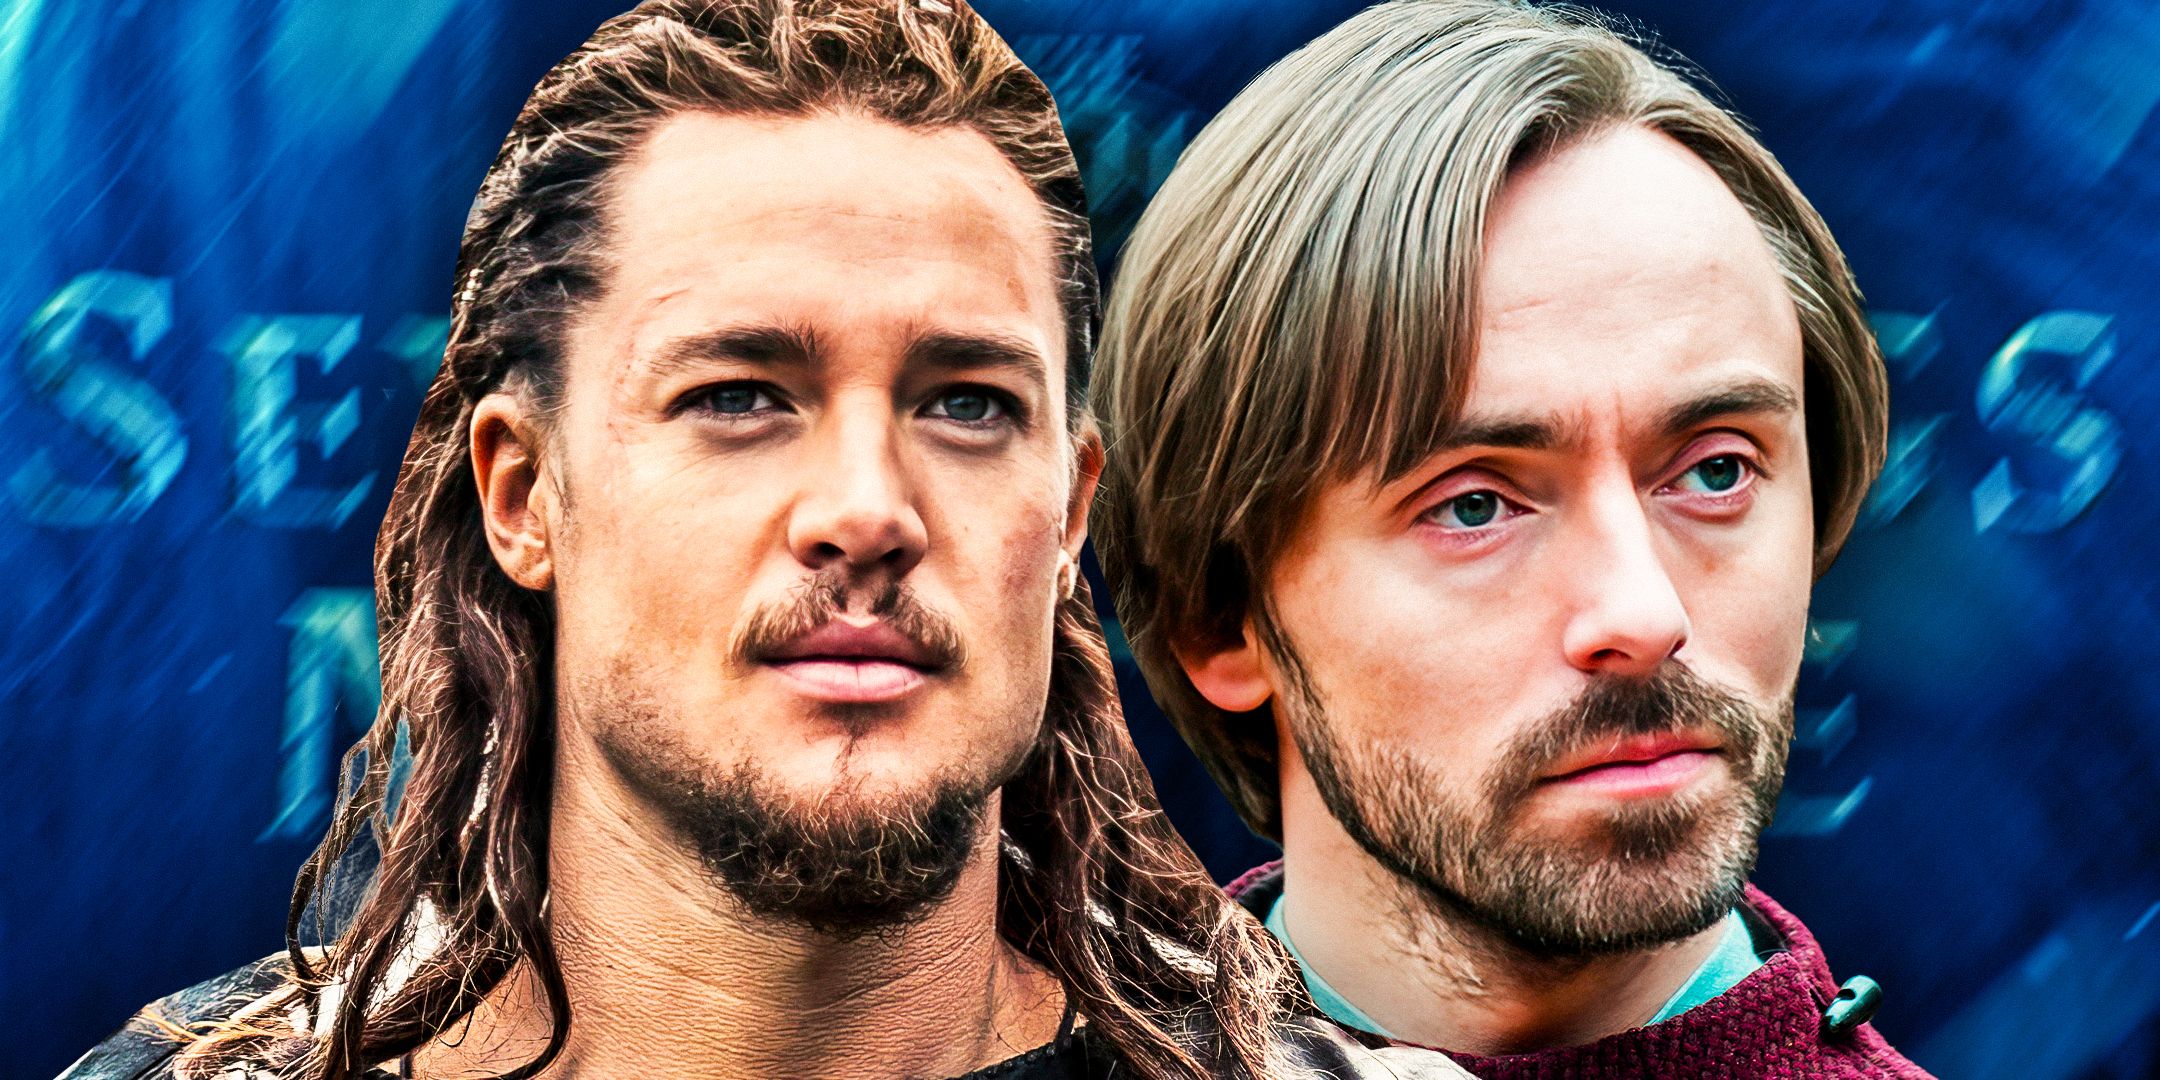 Uhtred and Alfred in a collage from The Last Kingdom.